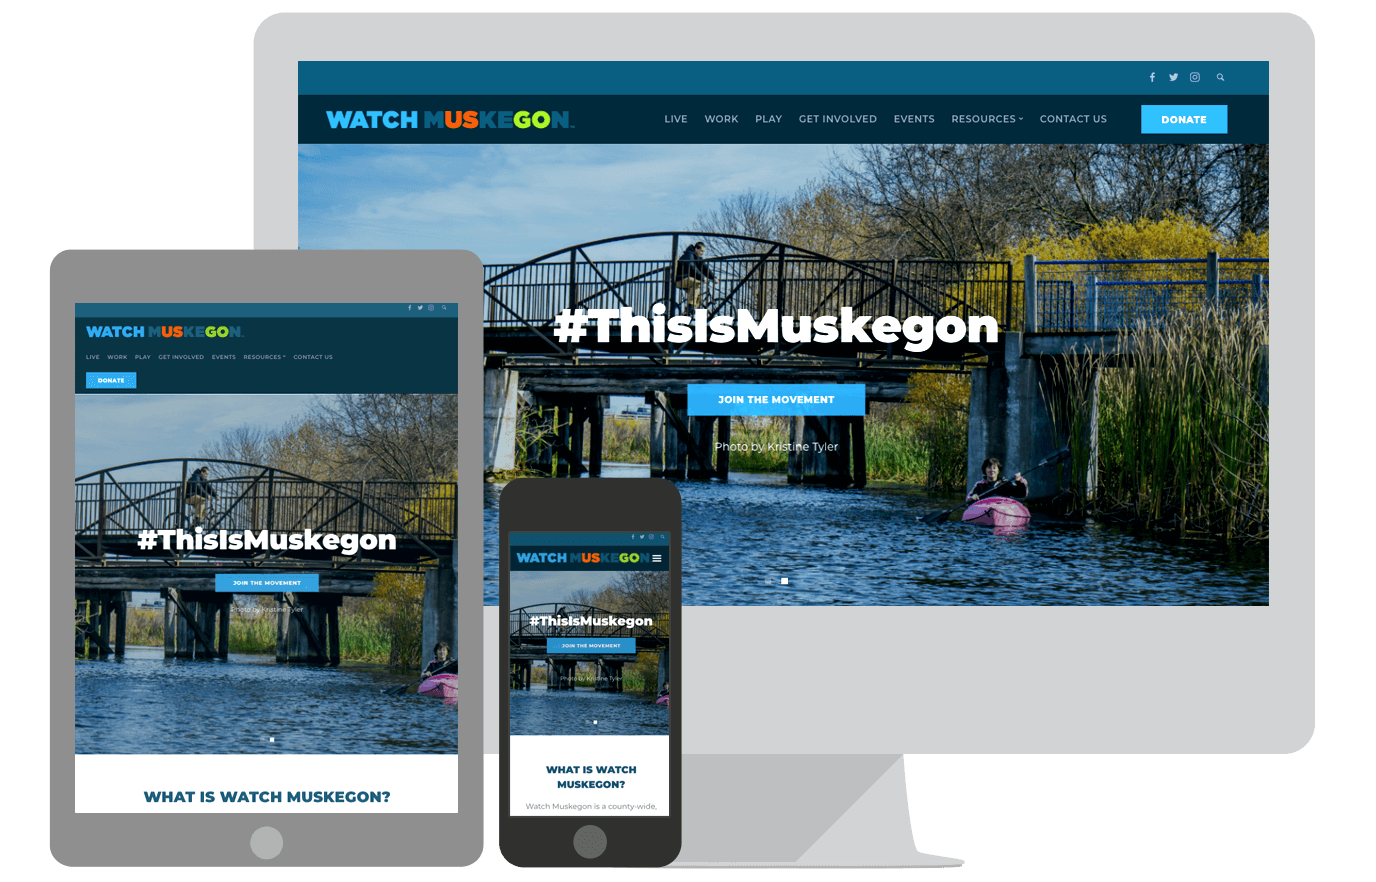 A mobile phone, tablet, and computer screen showing a website design for Watch Muskegon.